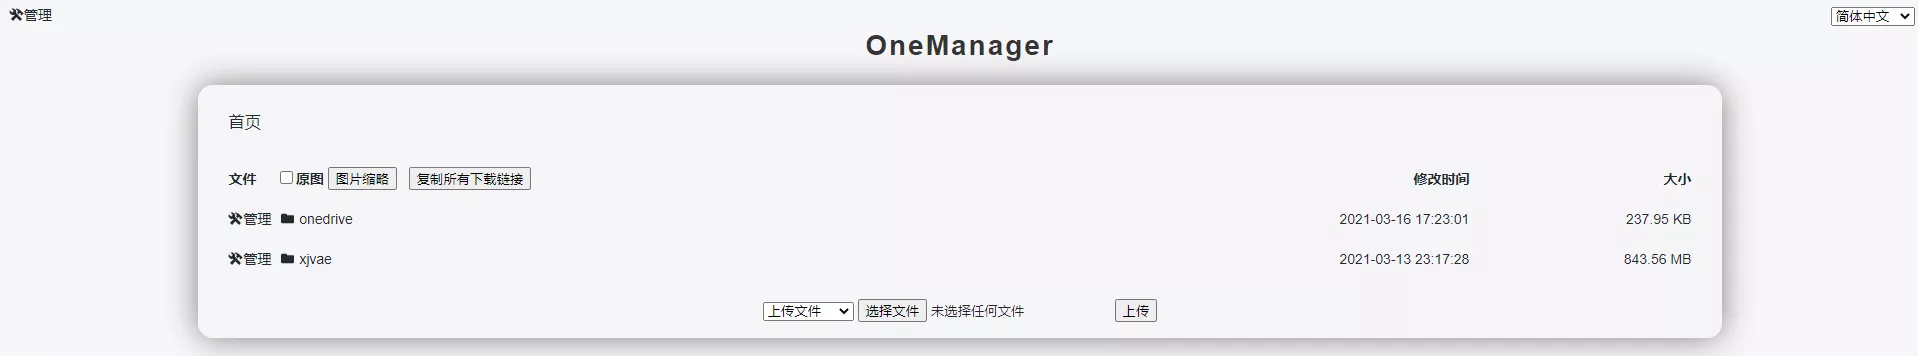 onemanage.png